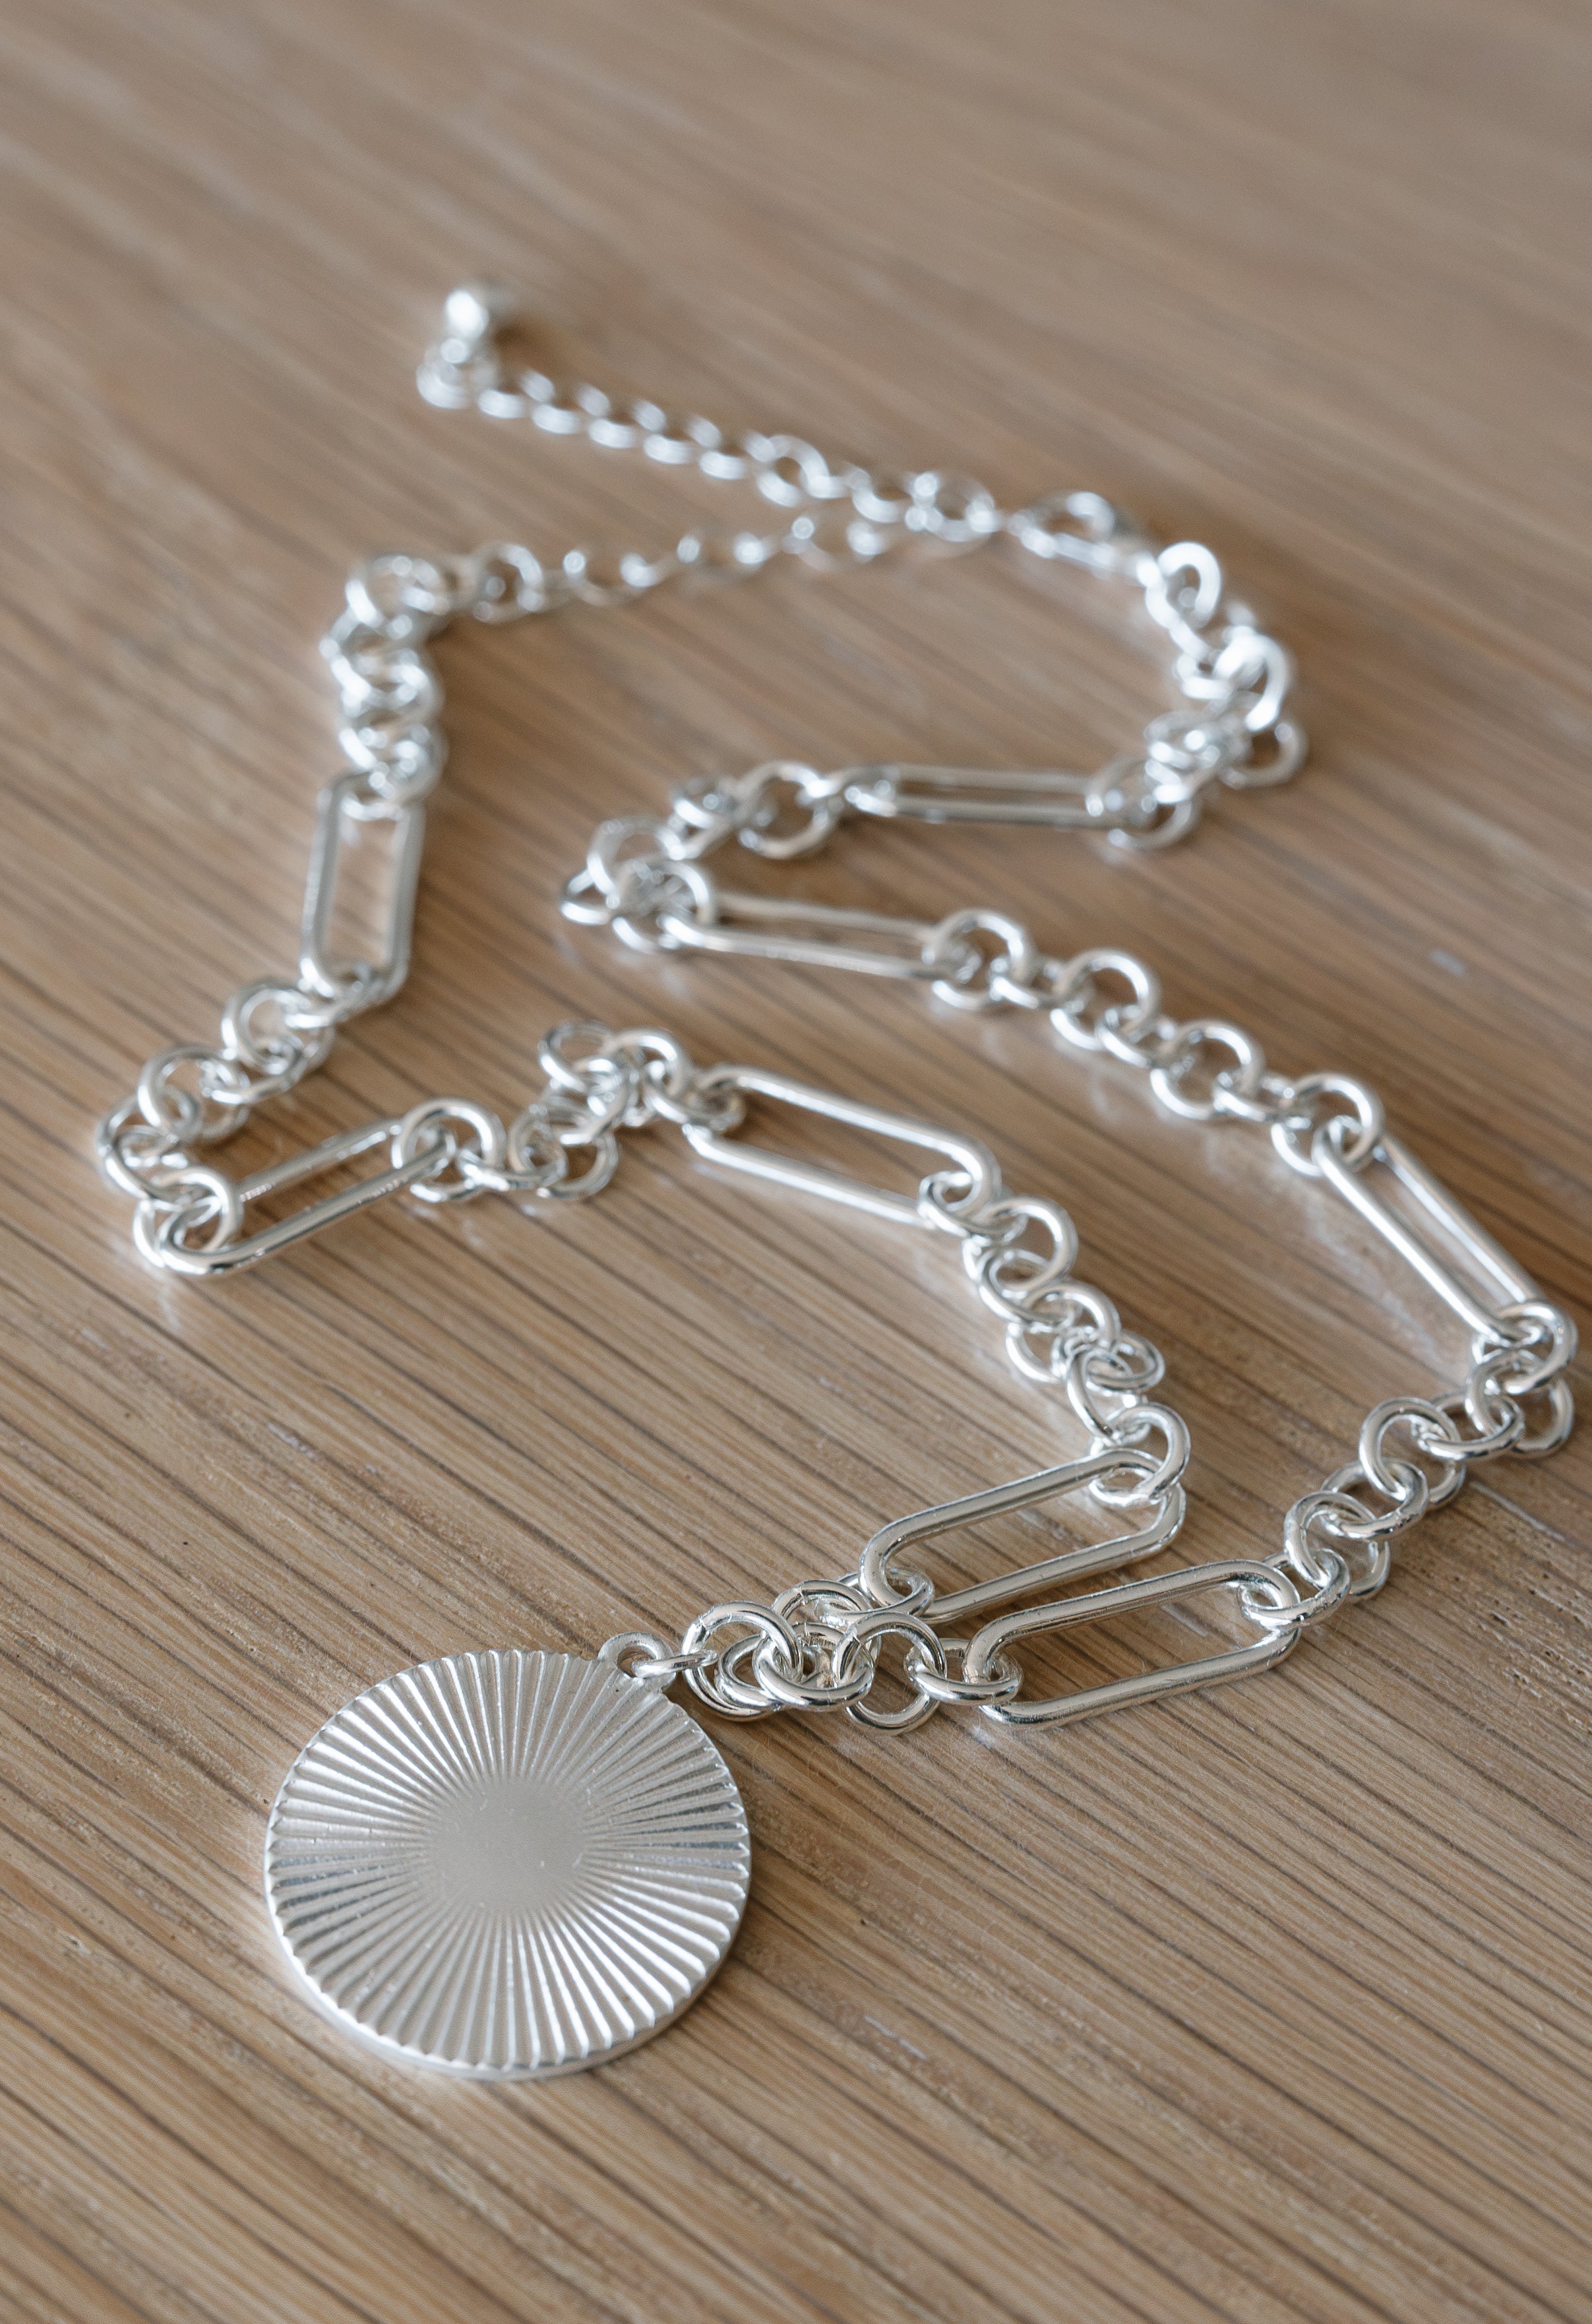 Barcelona Necklace - SILVER - willows clothing NECKLACES